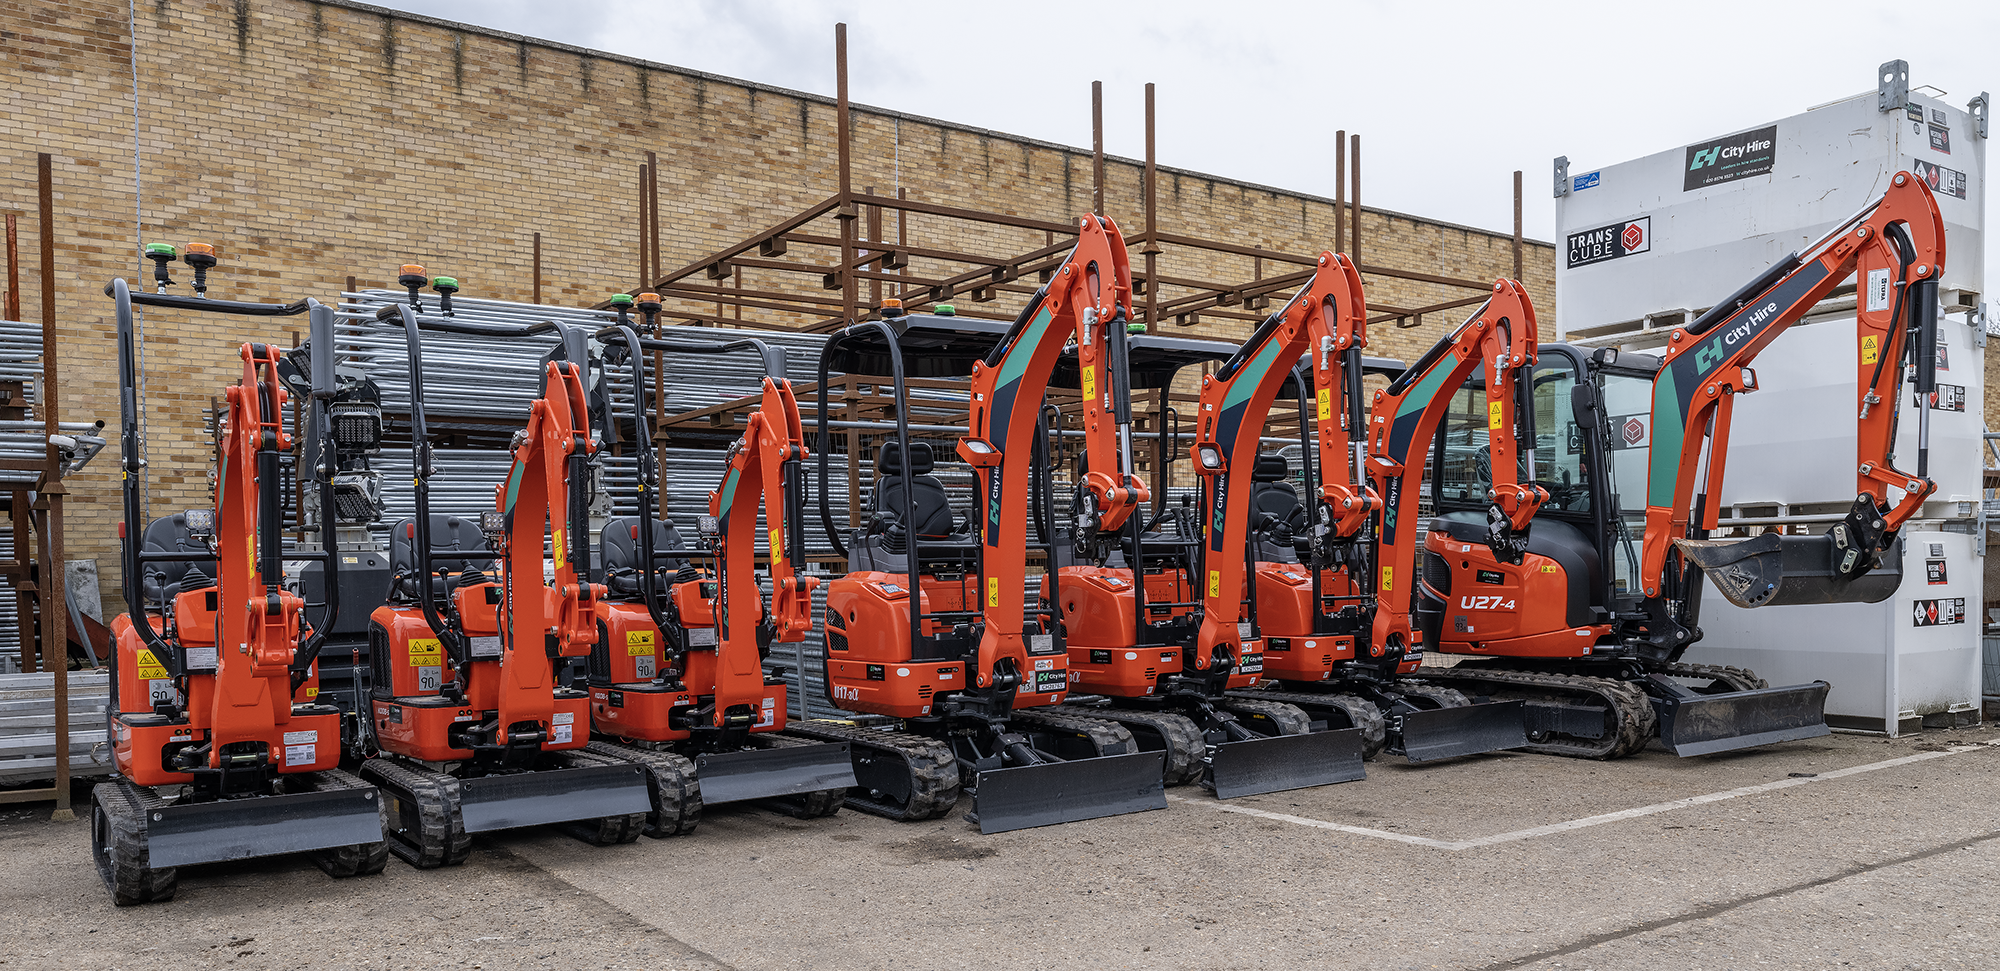 City Hire have increased their investment in Kubota